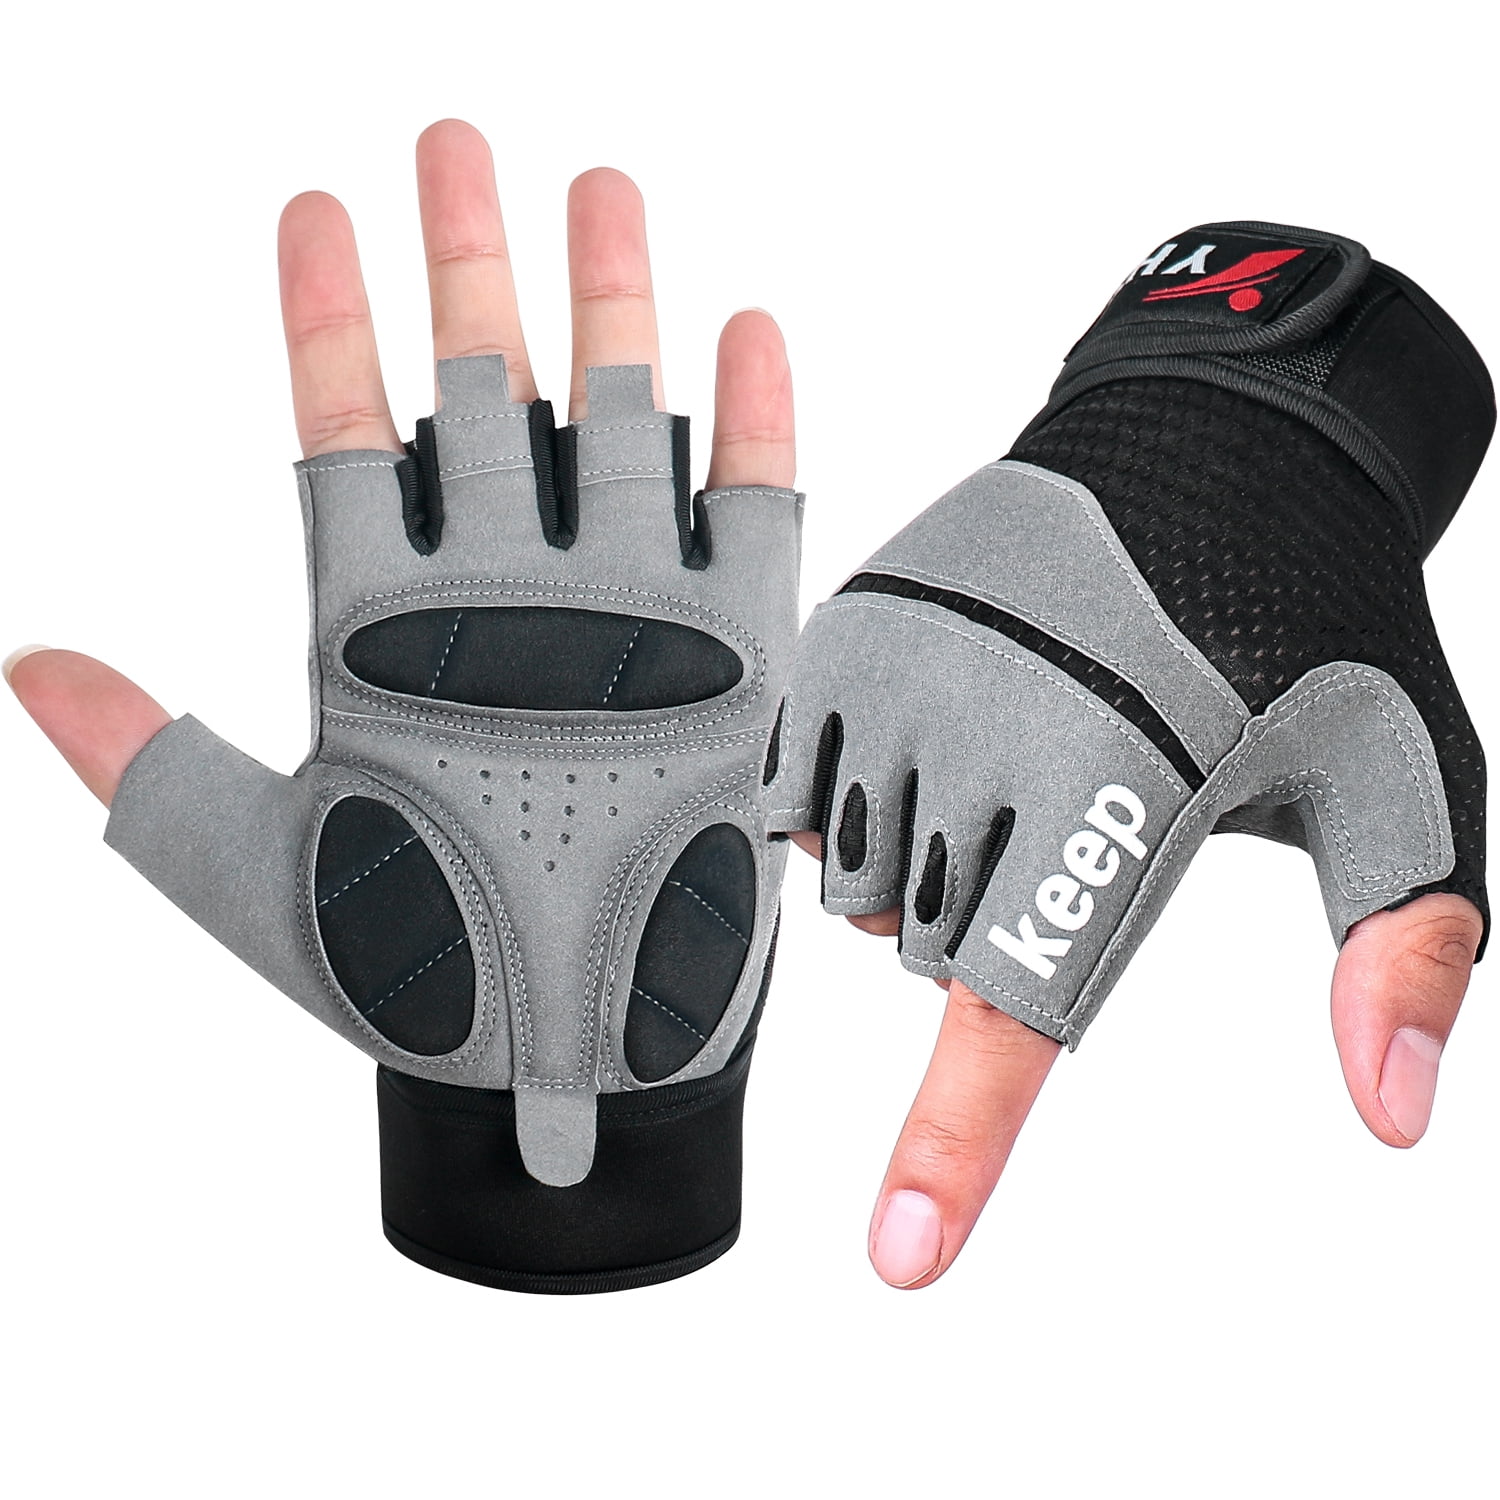 Workout Gloves for Men and Women Padded Breathable Exercise Workout Gloves Weight Lifting Gym Gloves with Wrist Support 